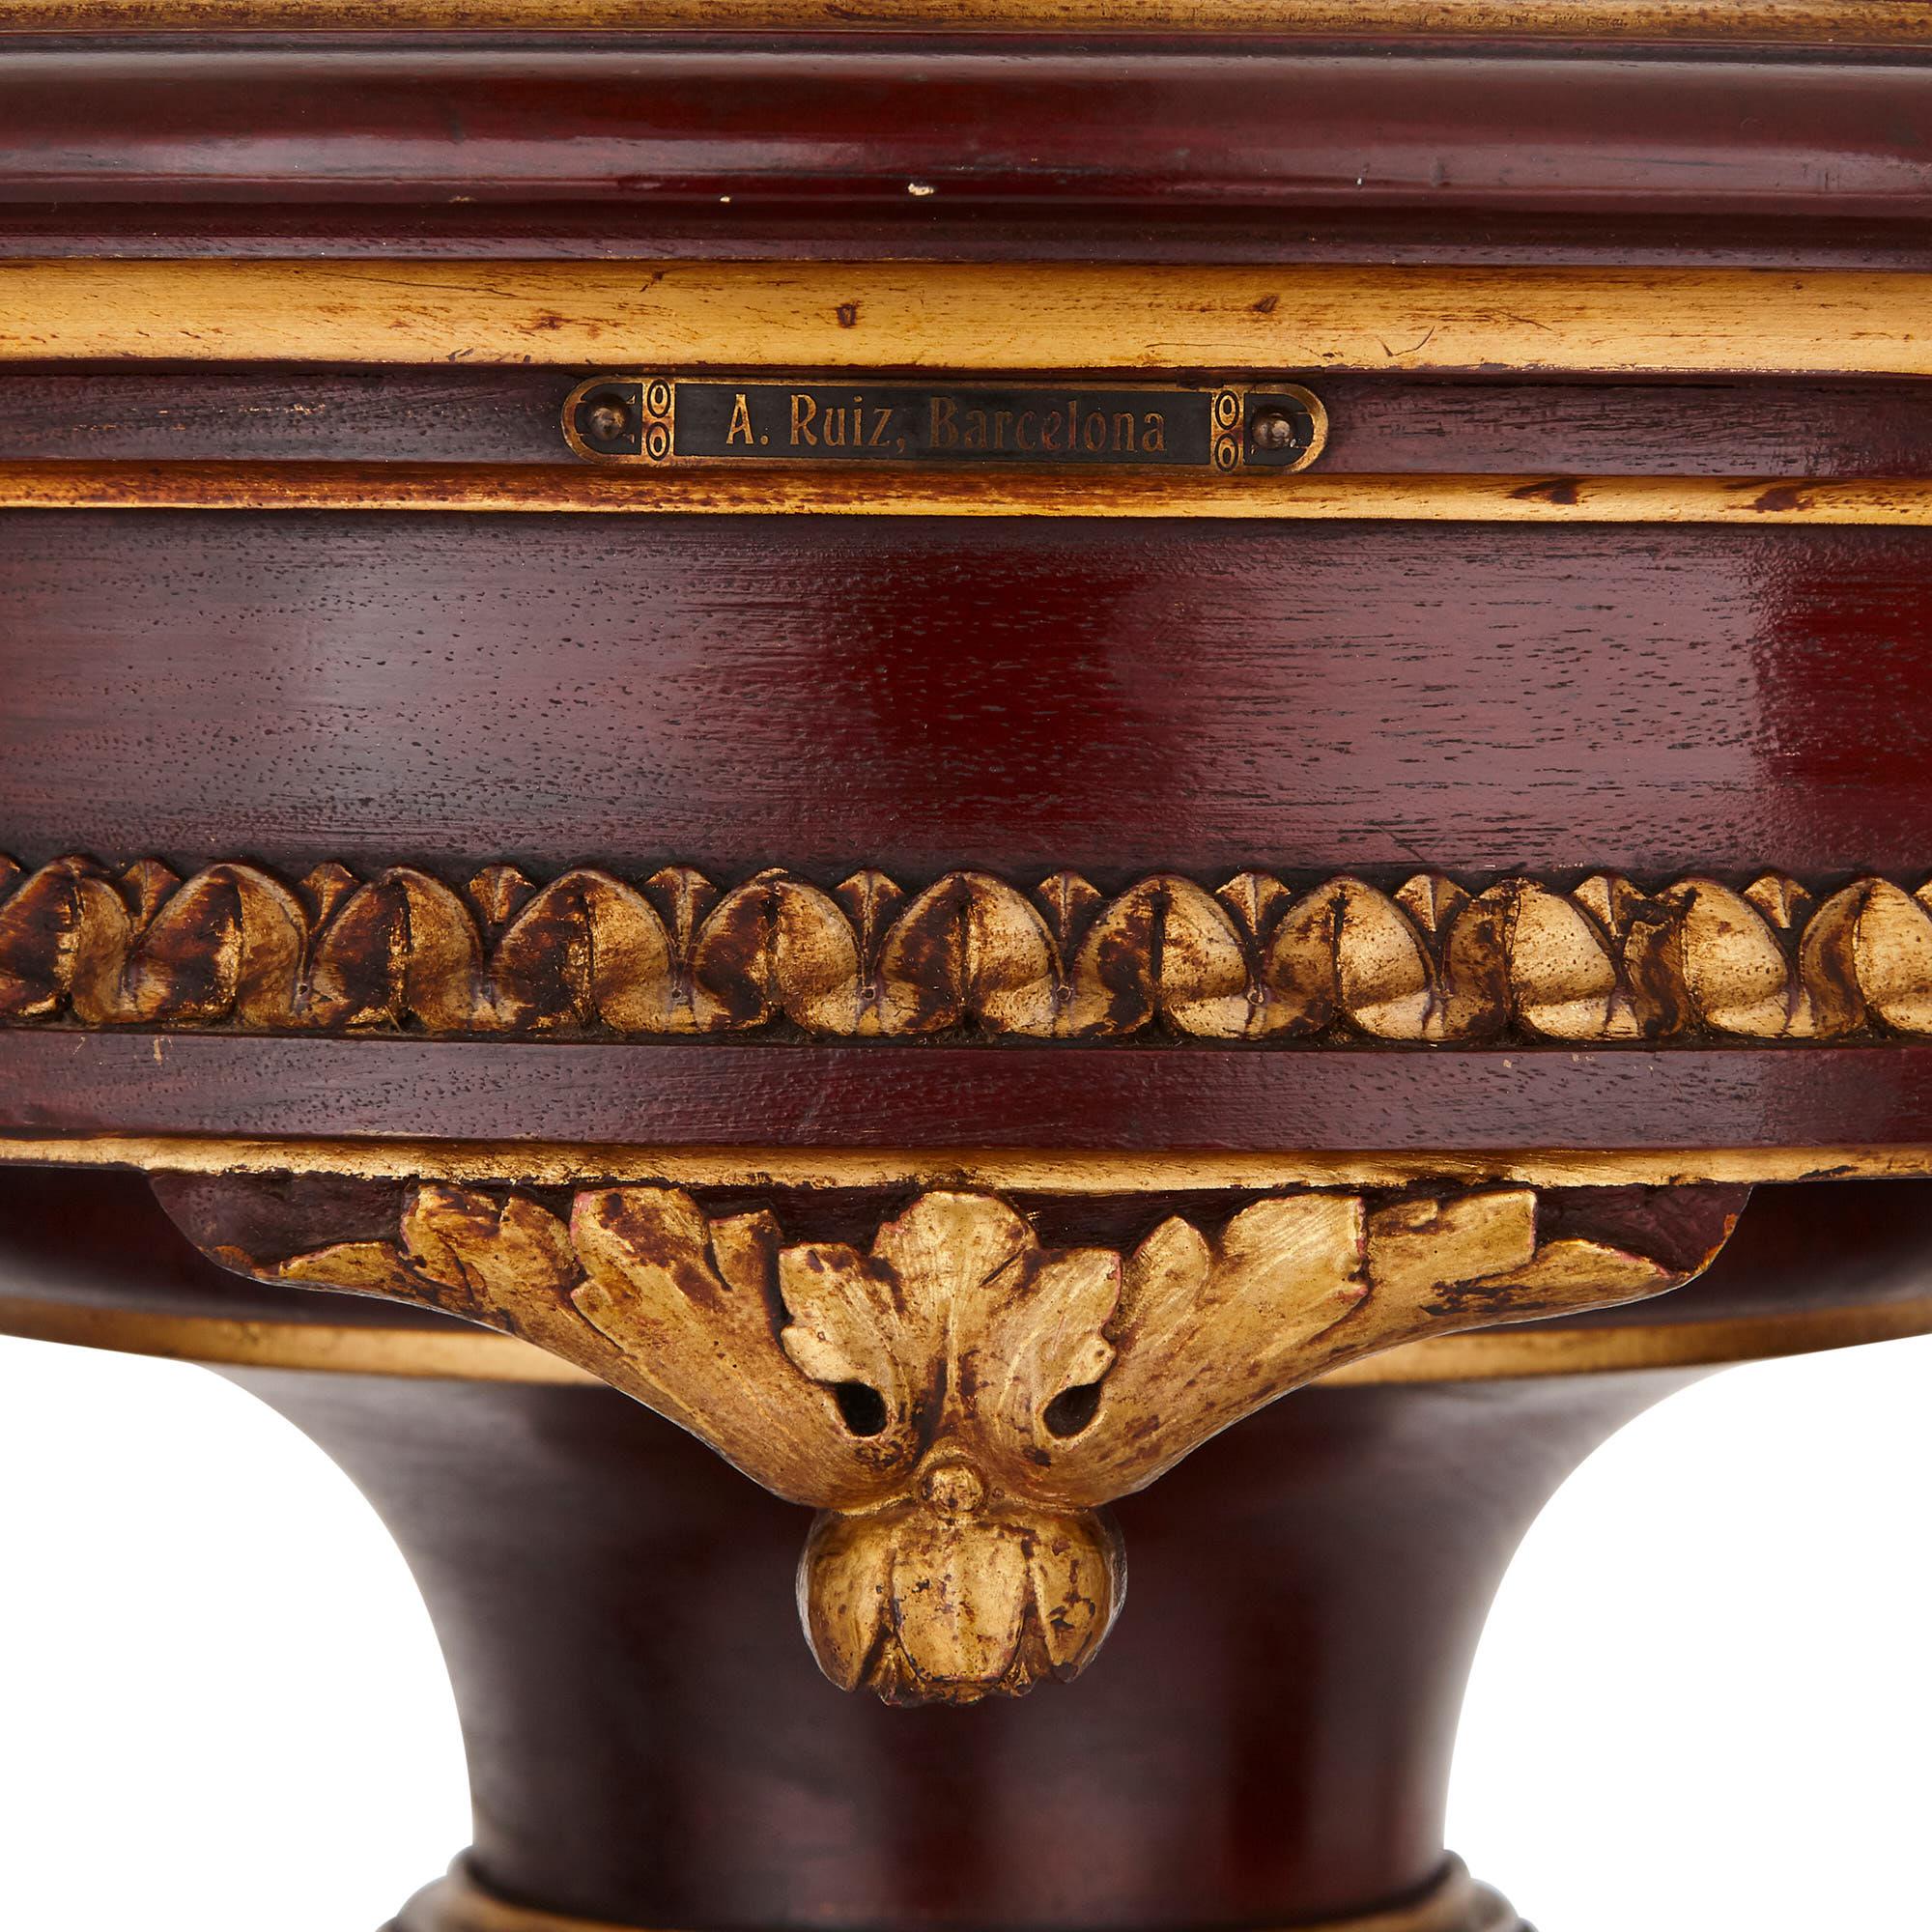 This beautiful pedestal was created by the prestigious Antonio Ruiz Valiente furniture company. The firm was active in the late 19th century, located in Barcelona on via Sepulveda 205. The item is mounted on its frieze with the name plaque, ‘A.